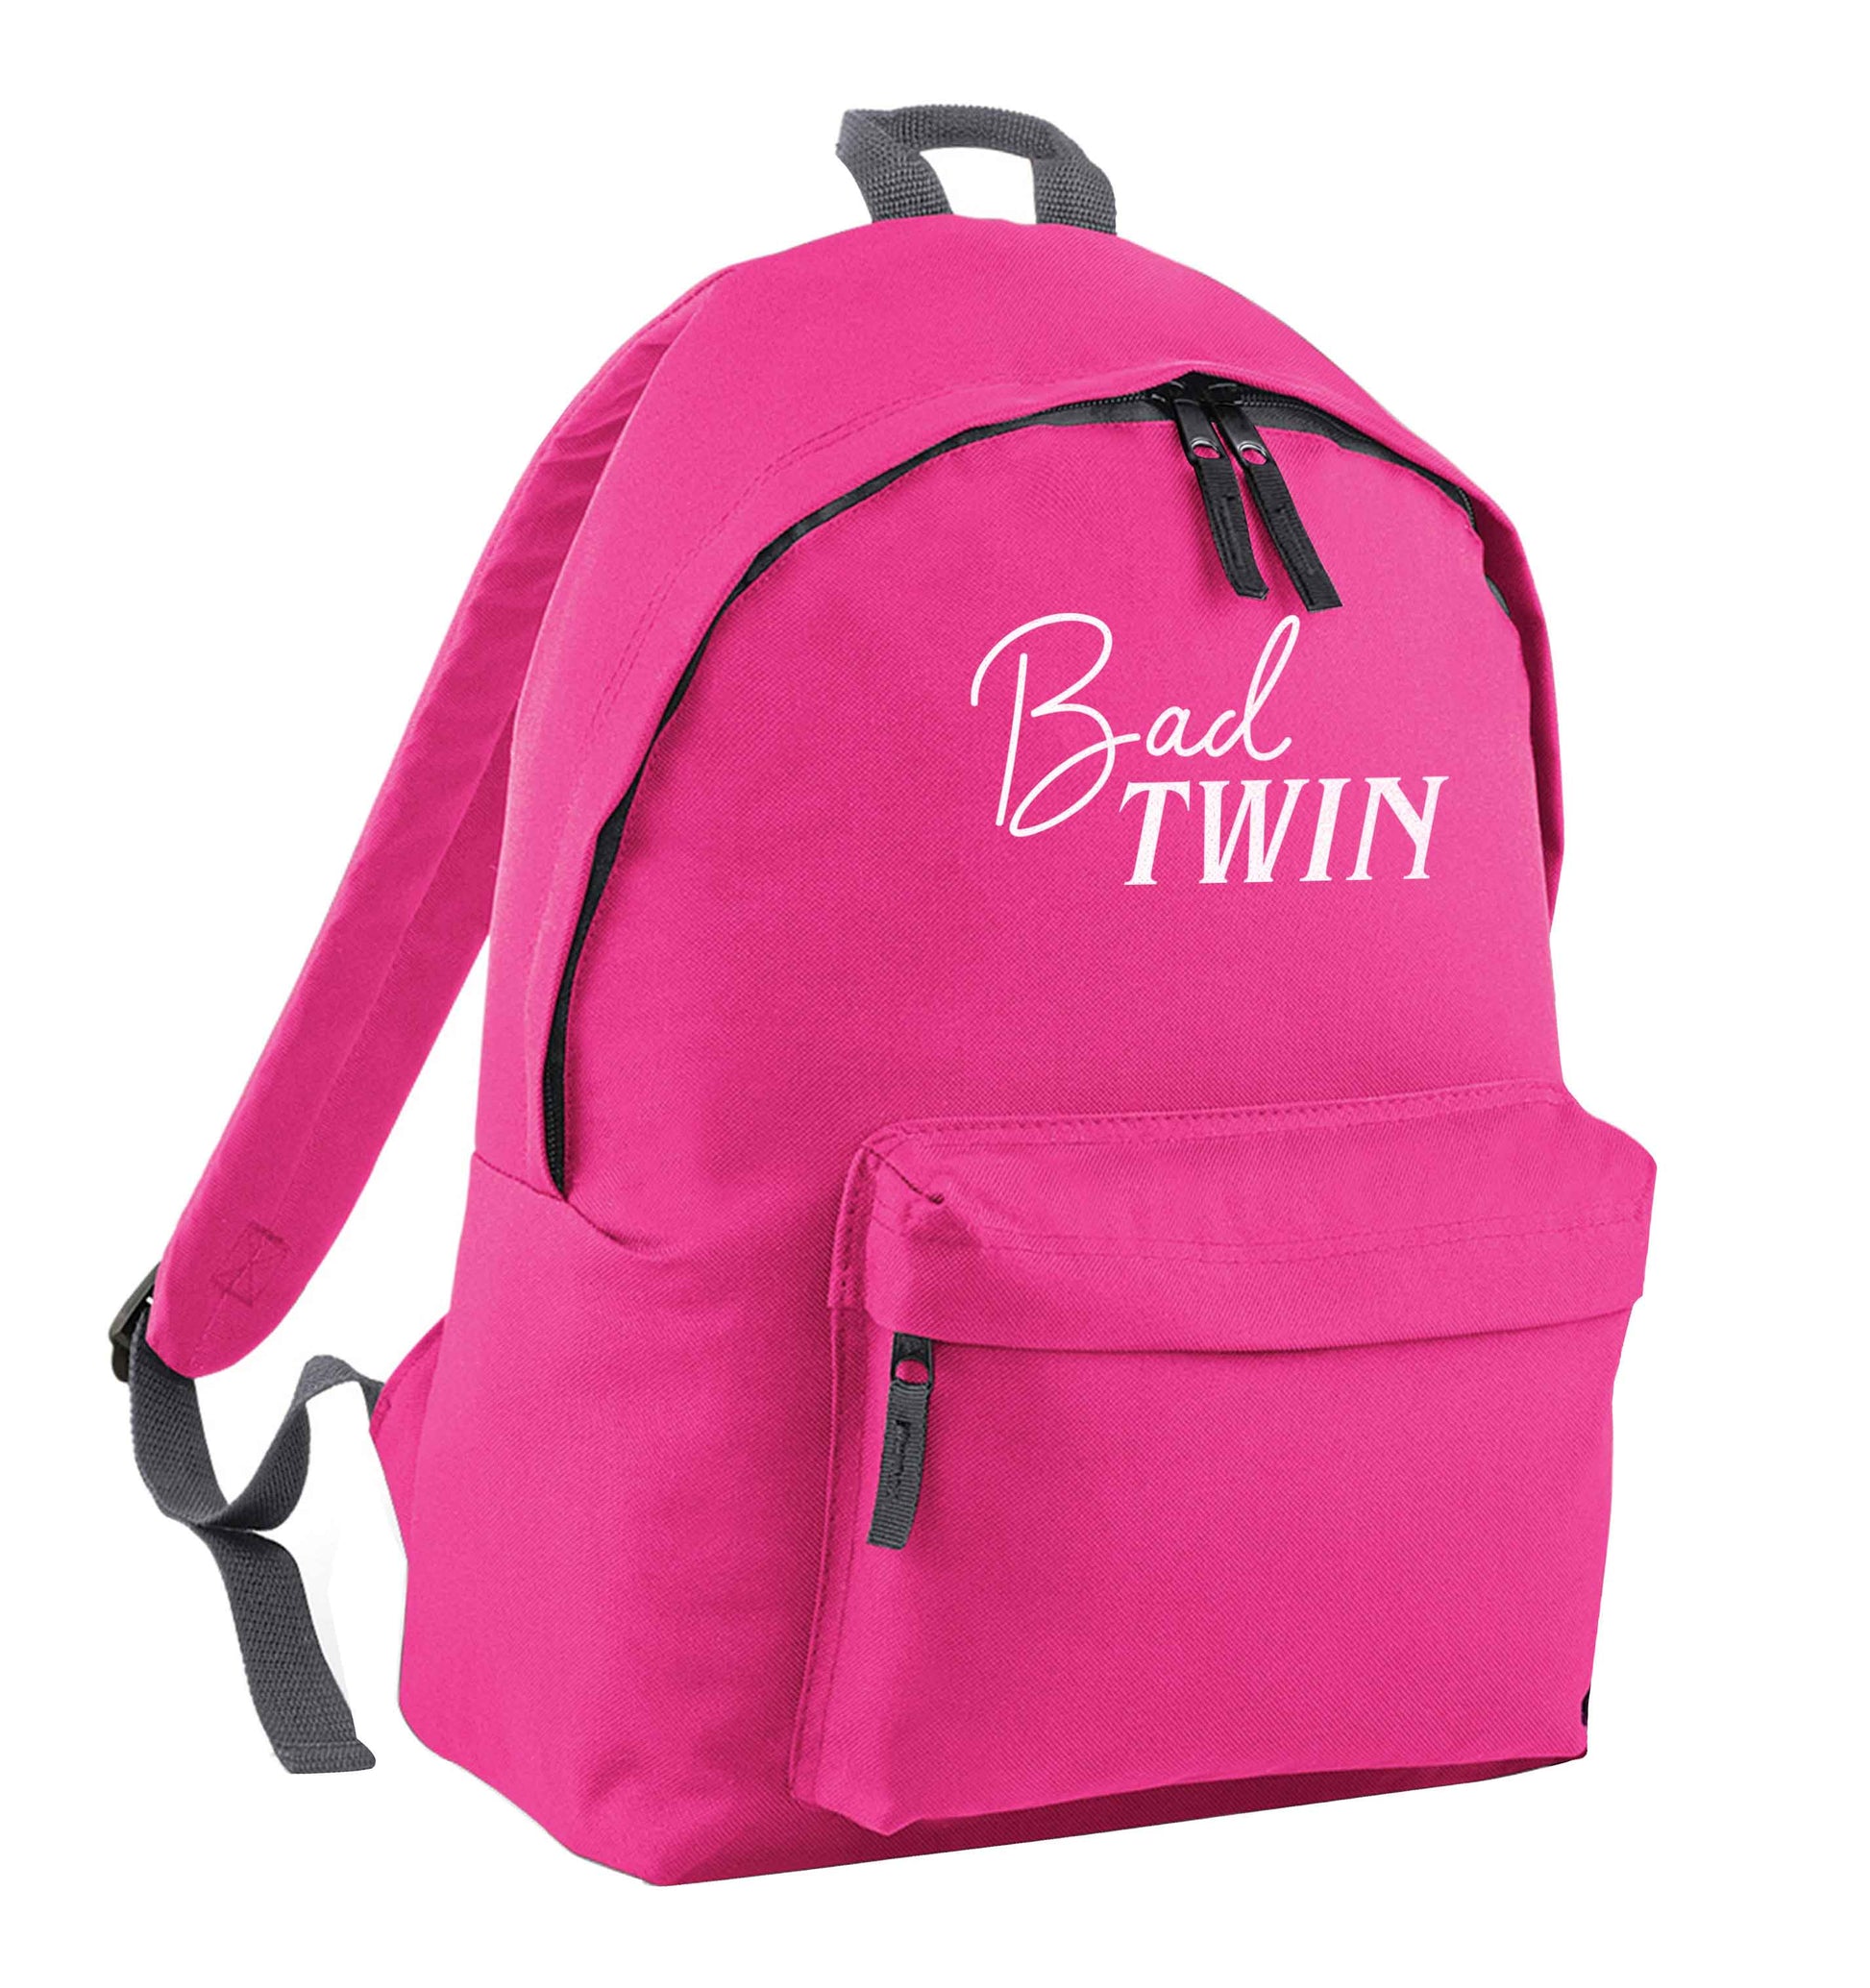 Bad twin pink adults backpack